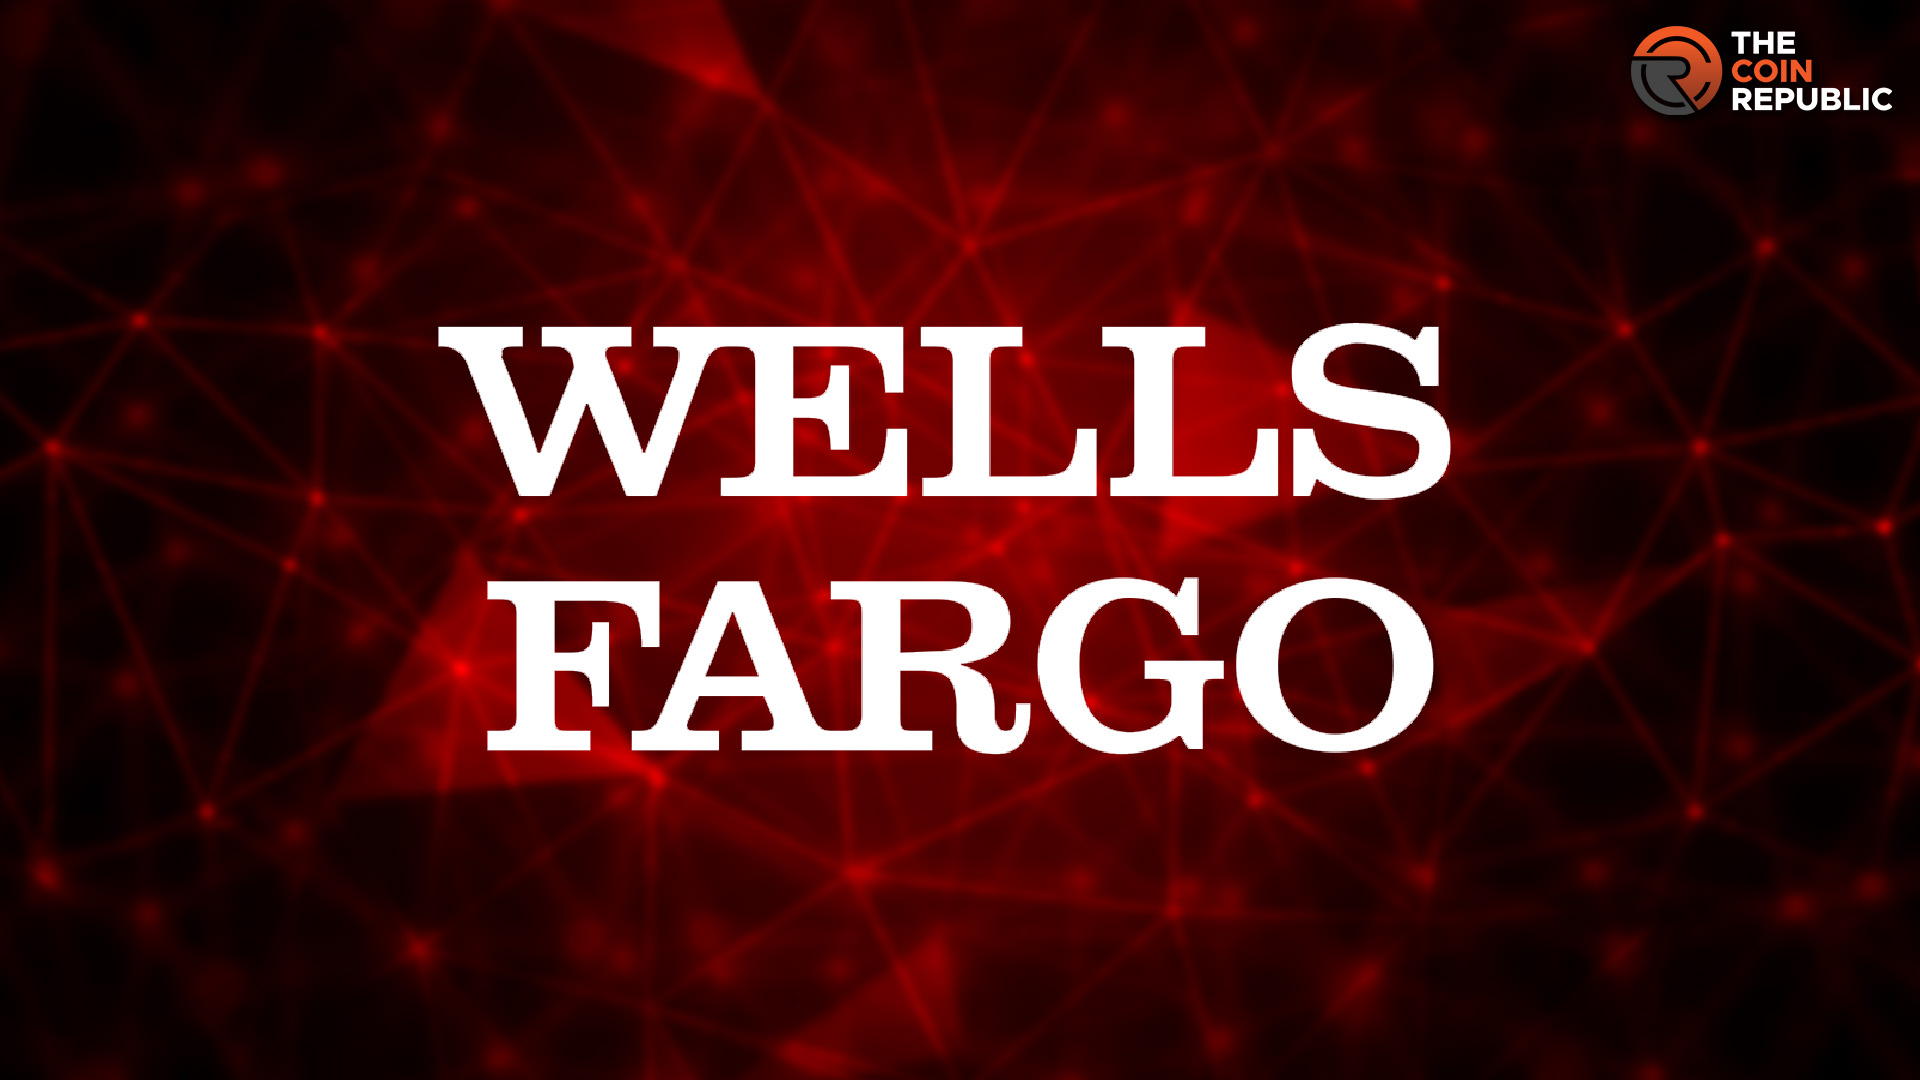 Wells Fargo Stock: Will WFC Stock Price Try to Make A Comeback?